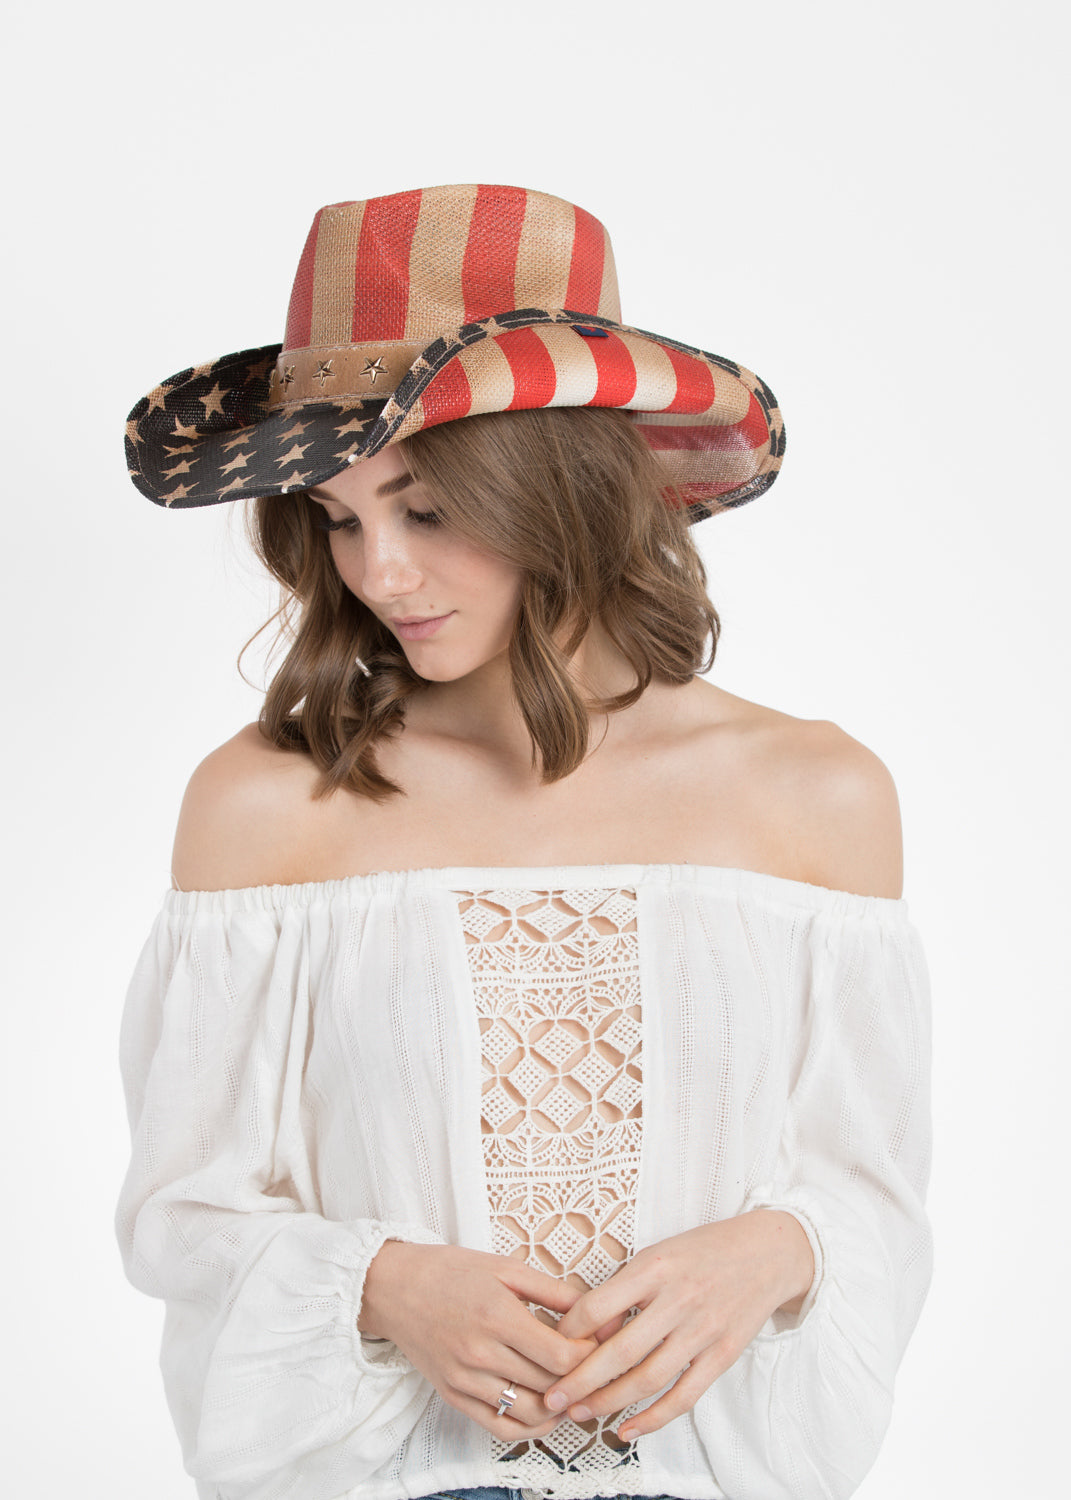 Justice Red White Blue USA Cowboy Hat by Peter Grimm - Bourbon Cowgirl